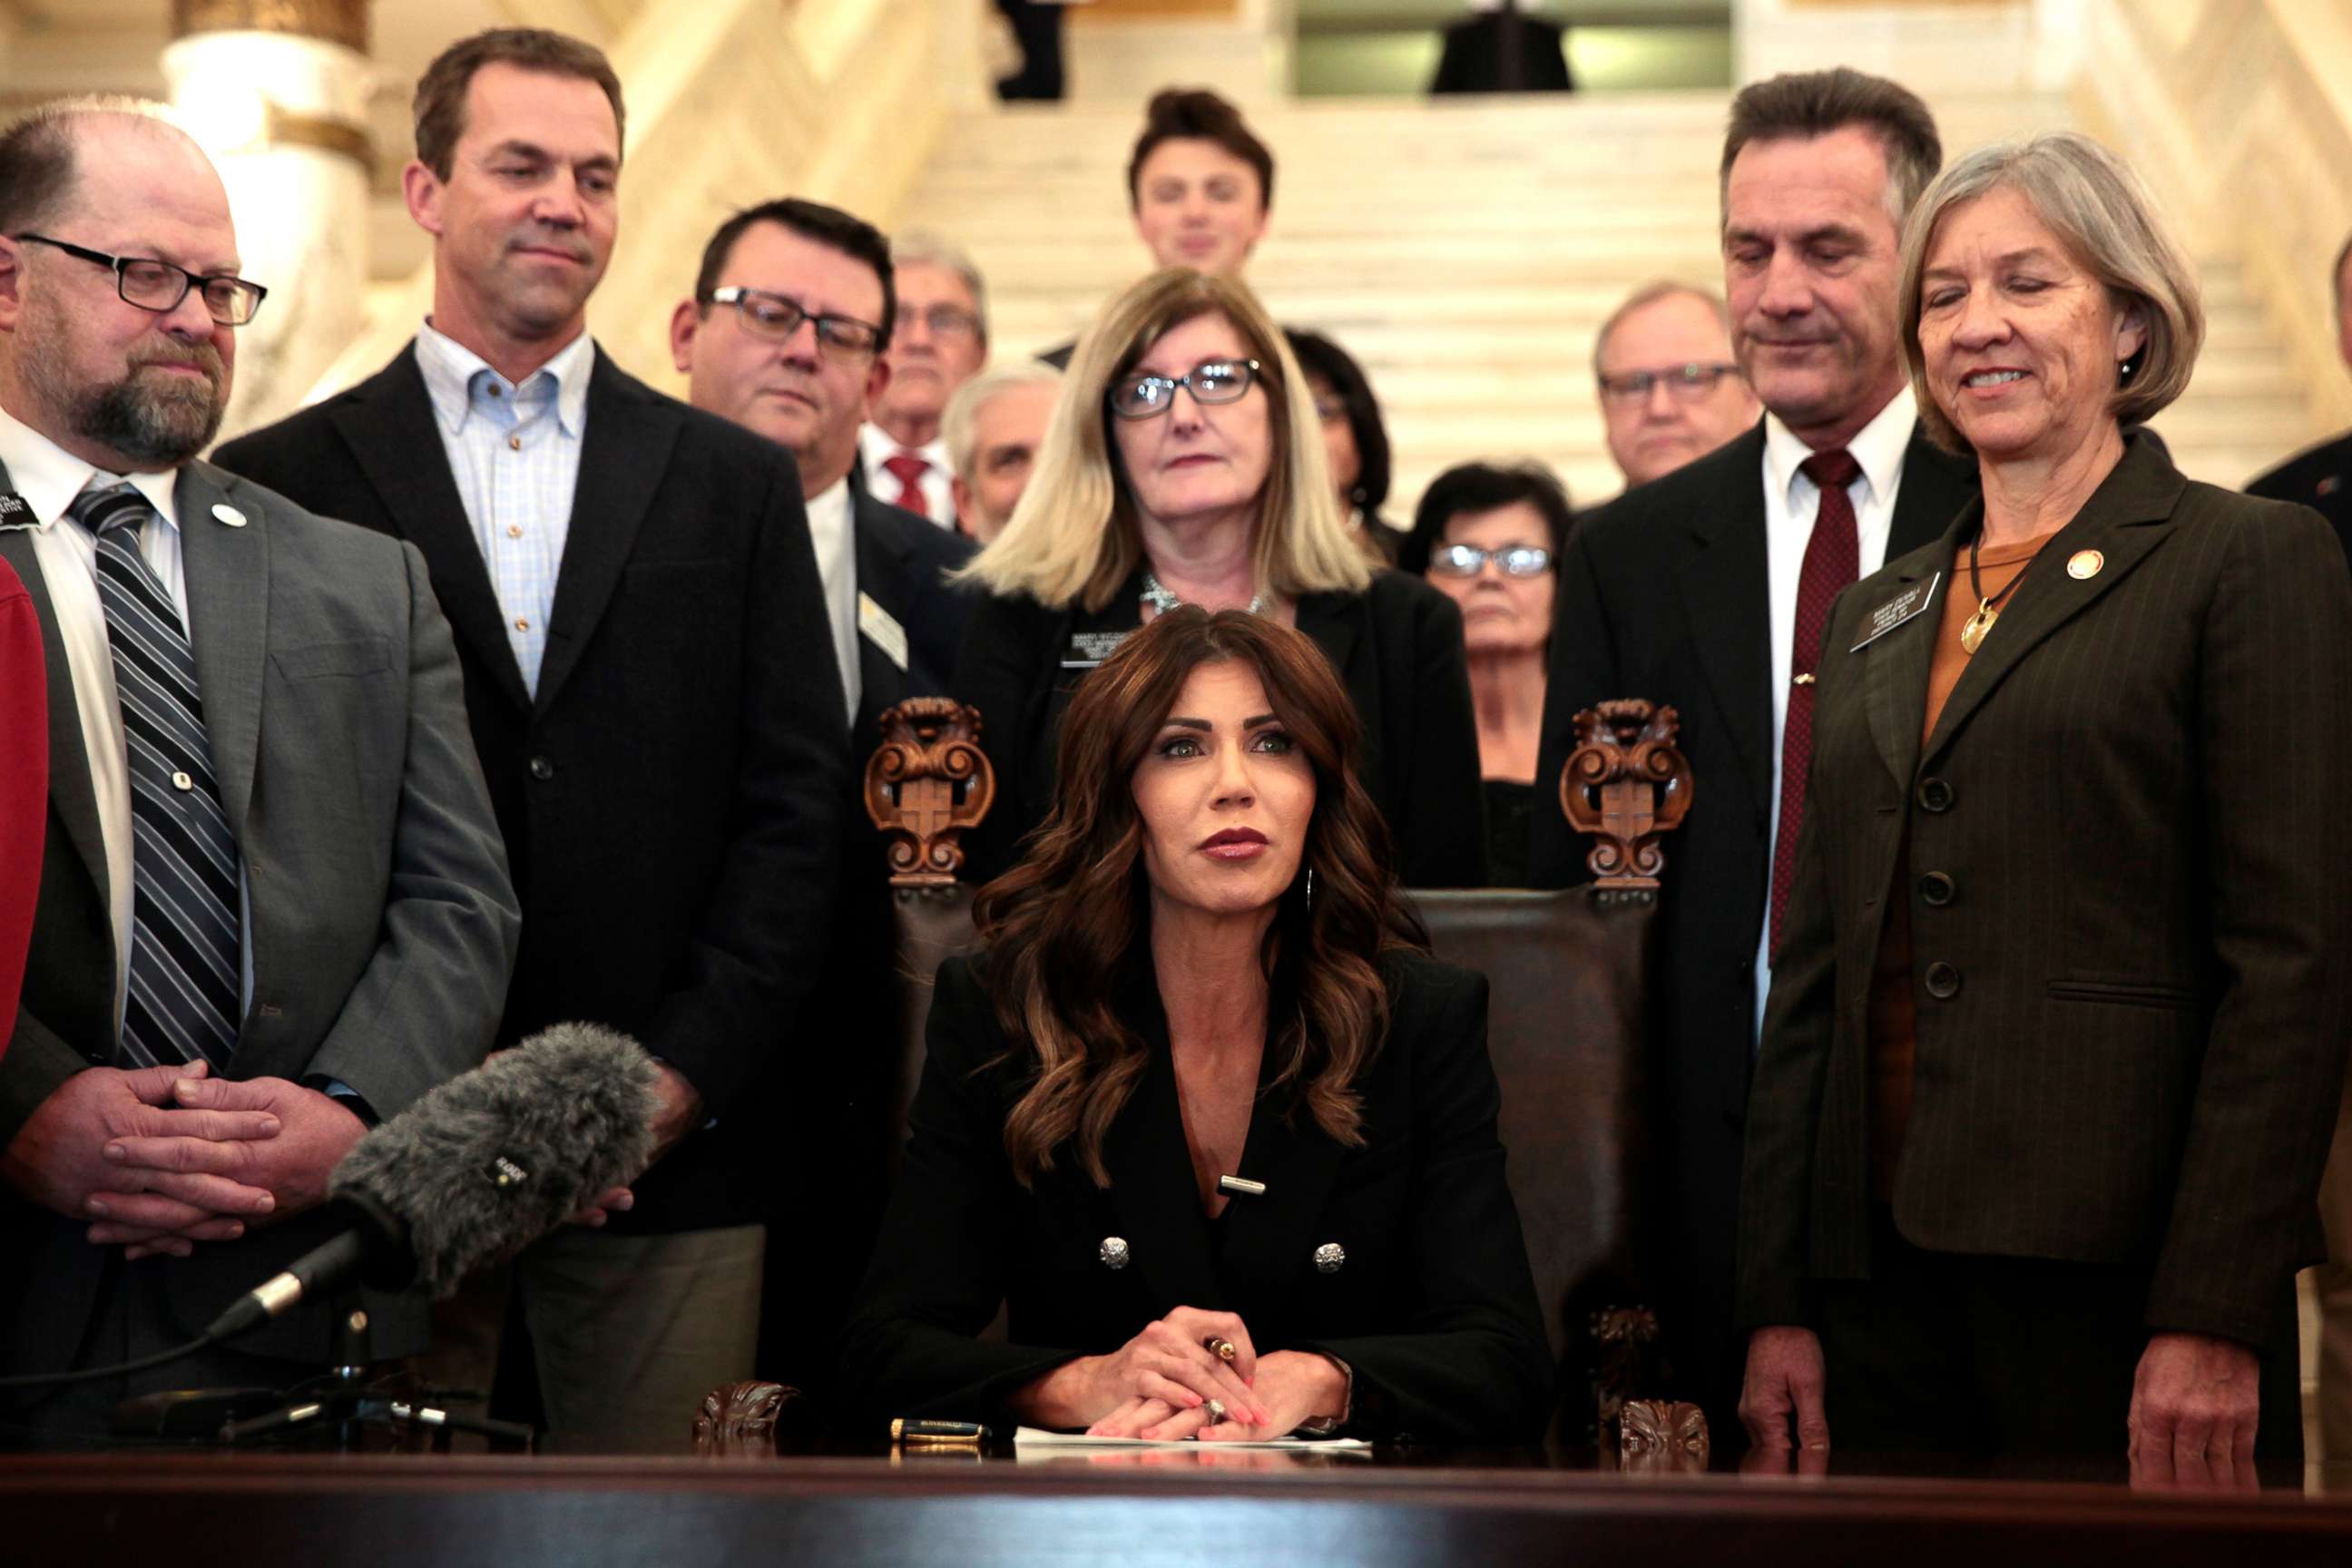 PHOTO: South Dakota Gov. Kristi Noem signs a bill Thursday, Feb. 3, 2022, at the state Capitol in Pierre, S.D., that will ban transgender women and girls from playing in school sports leagues that match their gender identity.